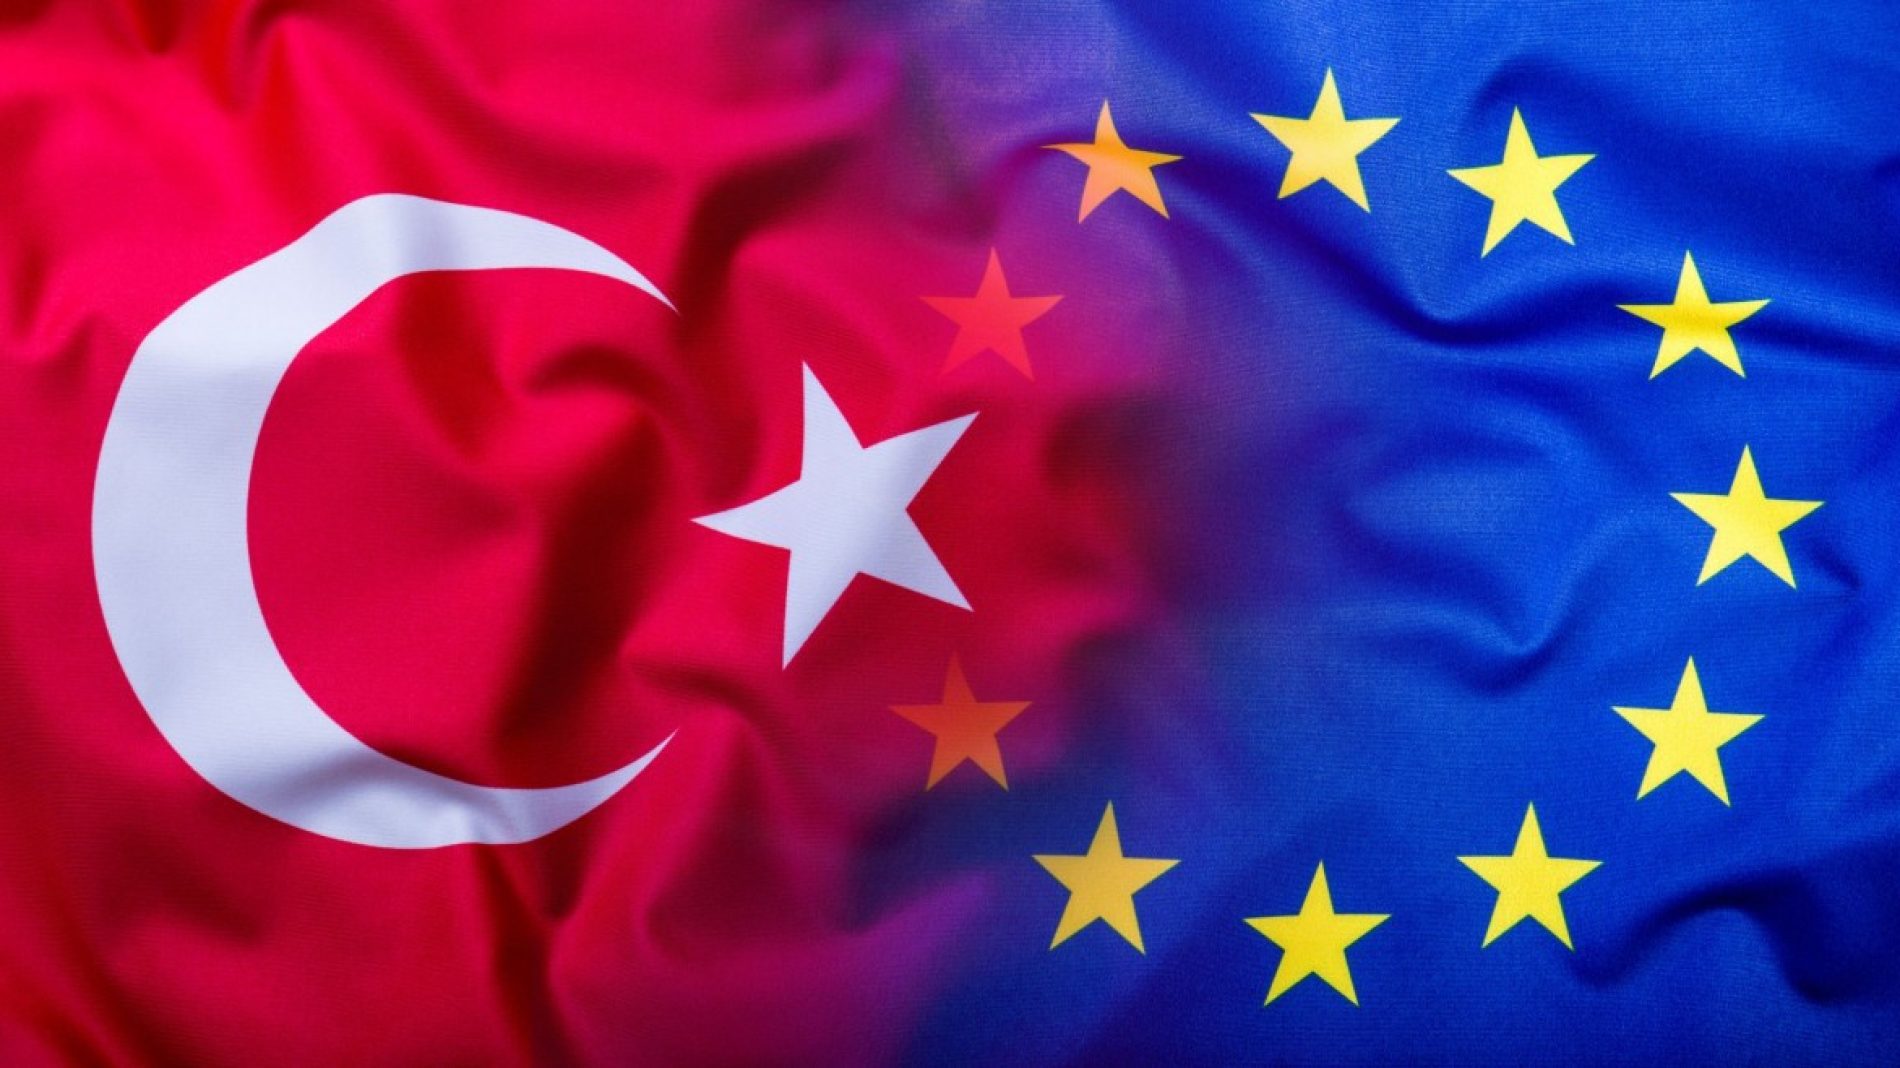 The EU and Turkey flags together